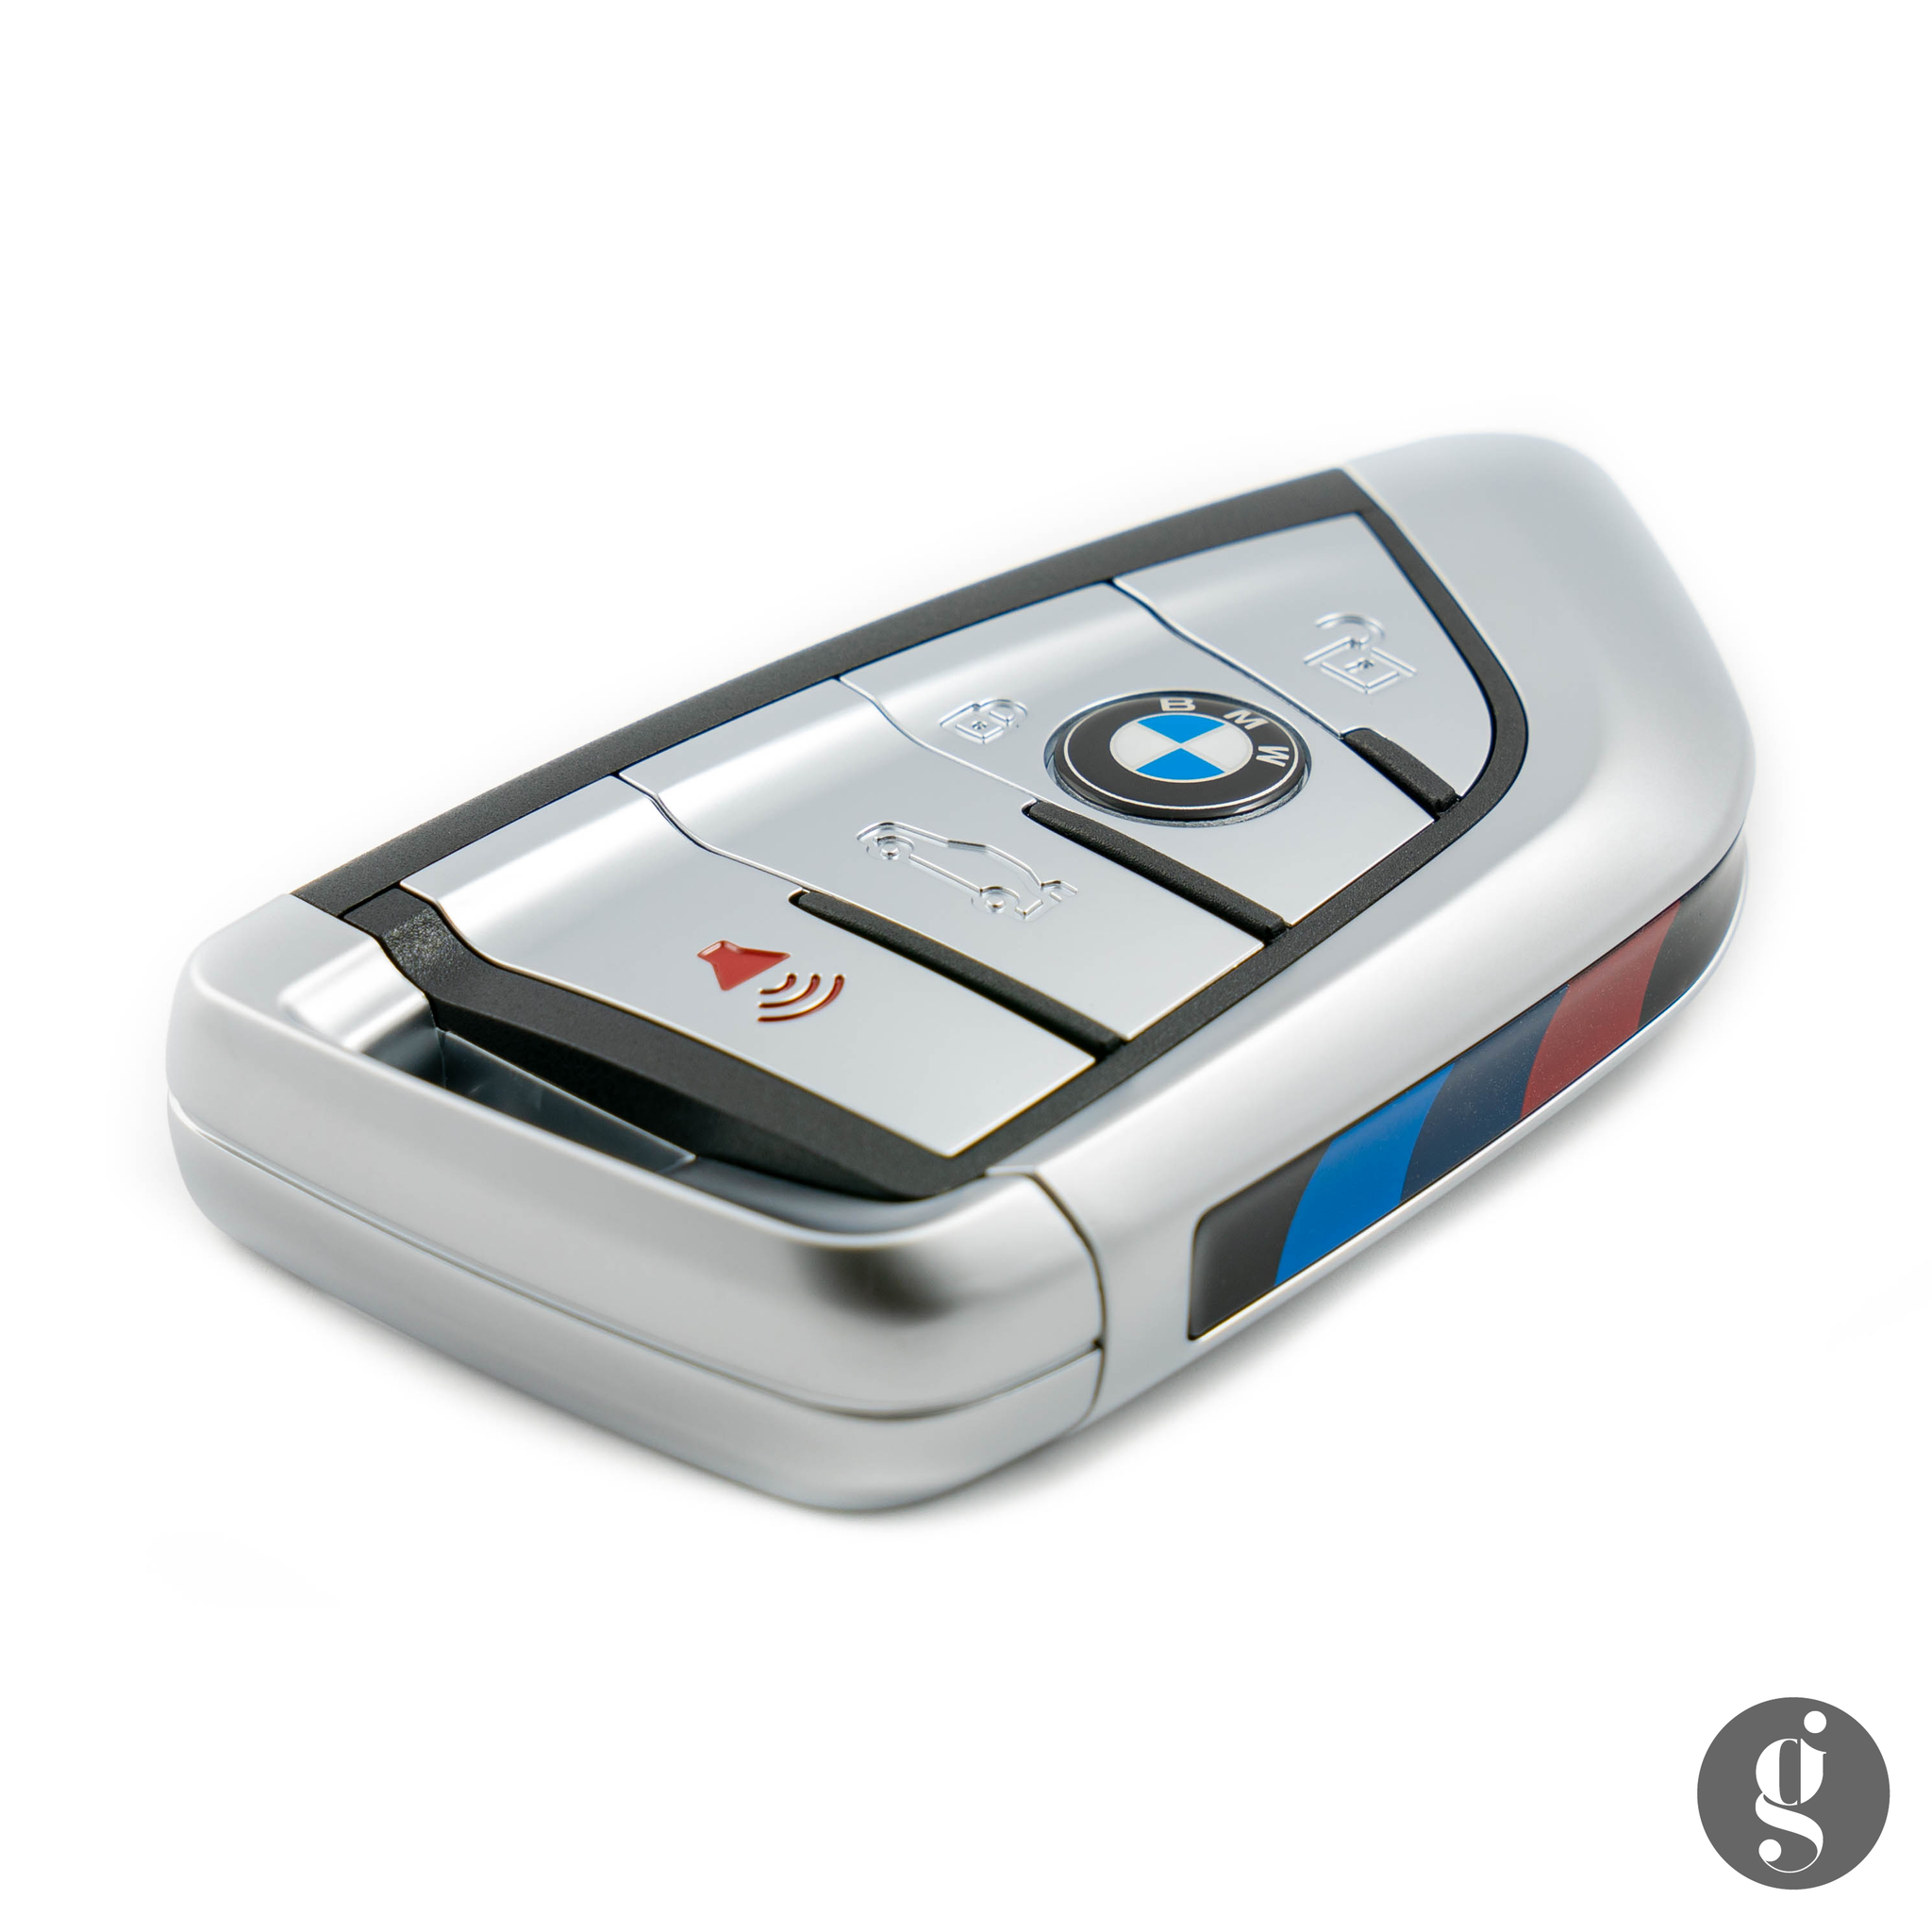 Replacing and Programming BMW Key Fob in 3 steps. Read more